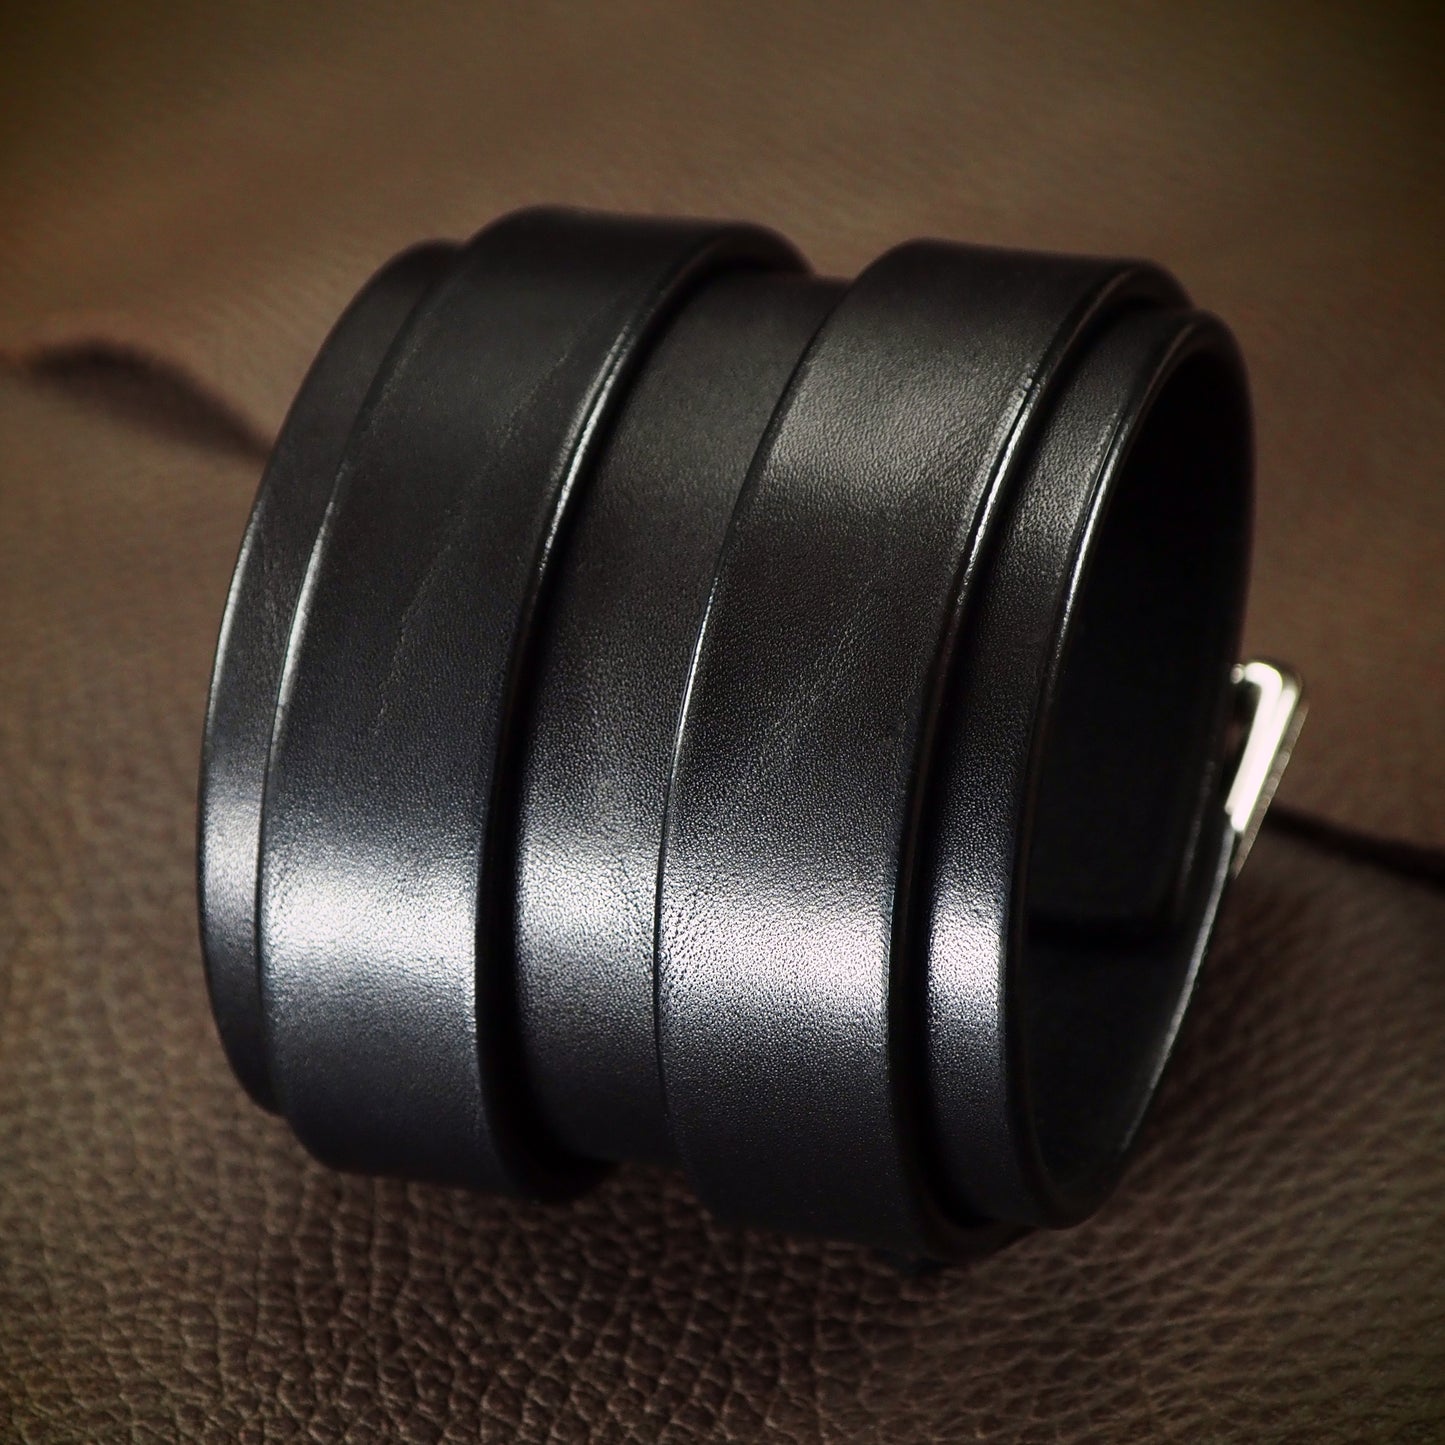 2.5" black double strap Leather cuff polished nickel